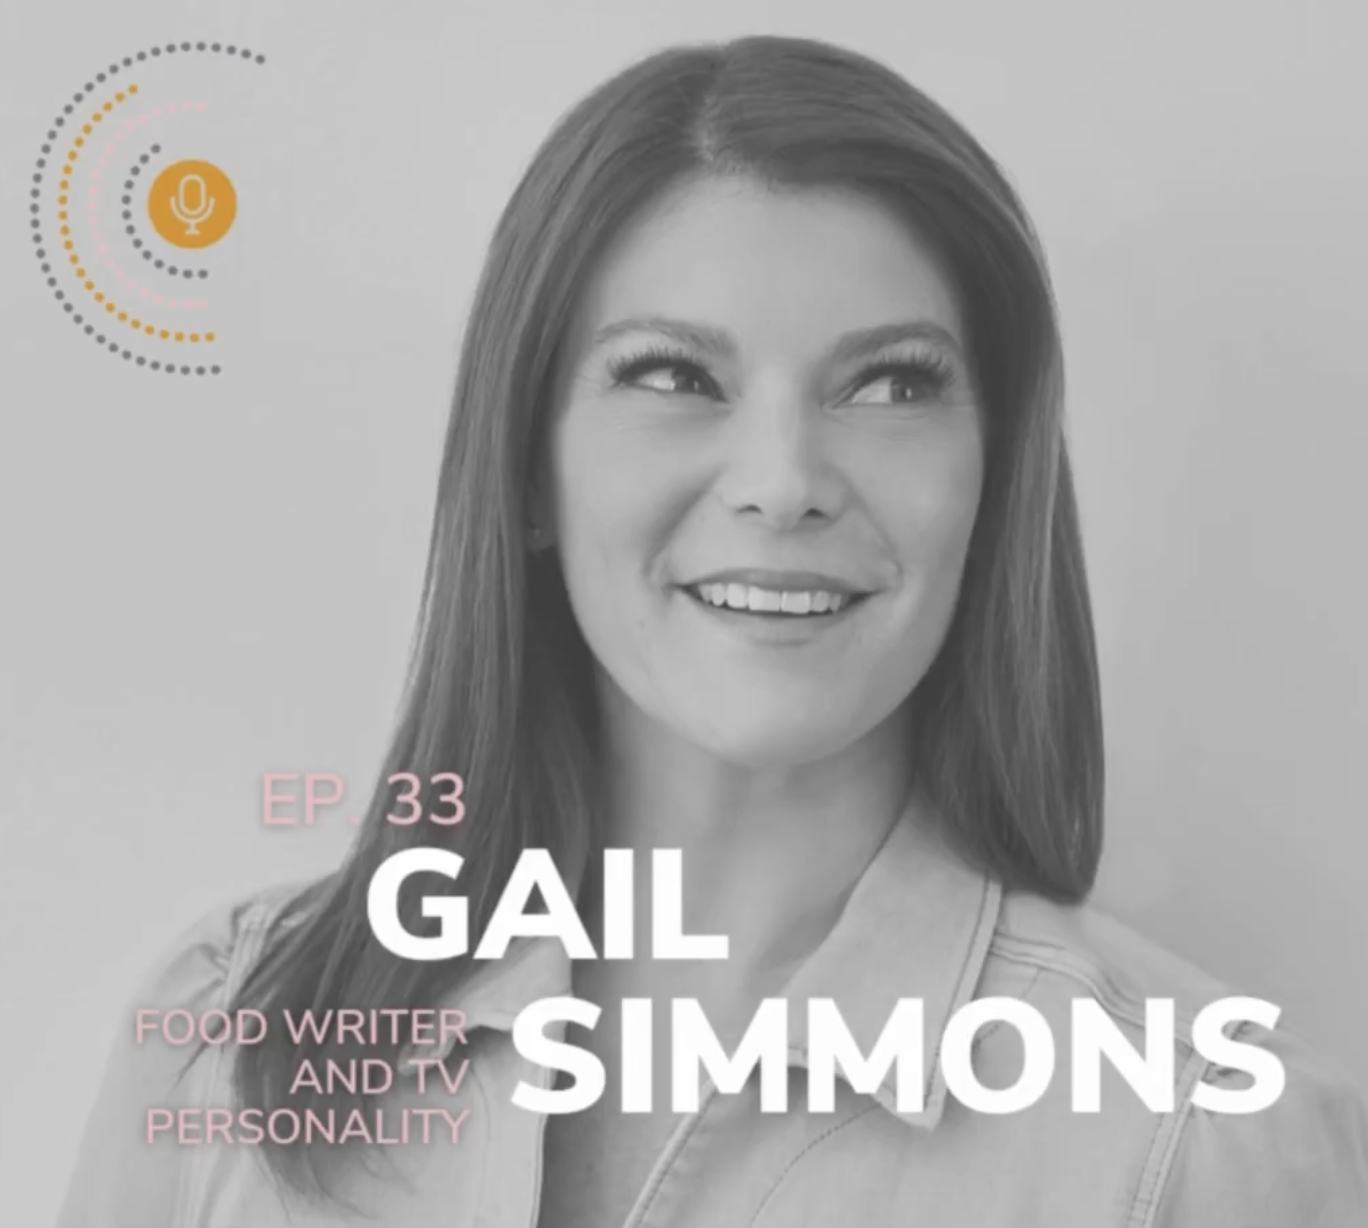 Top Chef Producer Gail Simmons' Culinary Journey on In Her Words Podcast